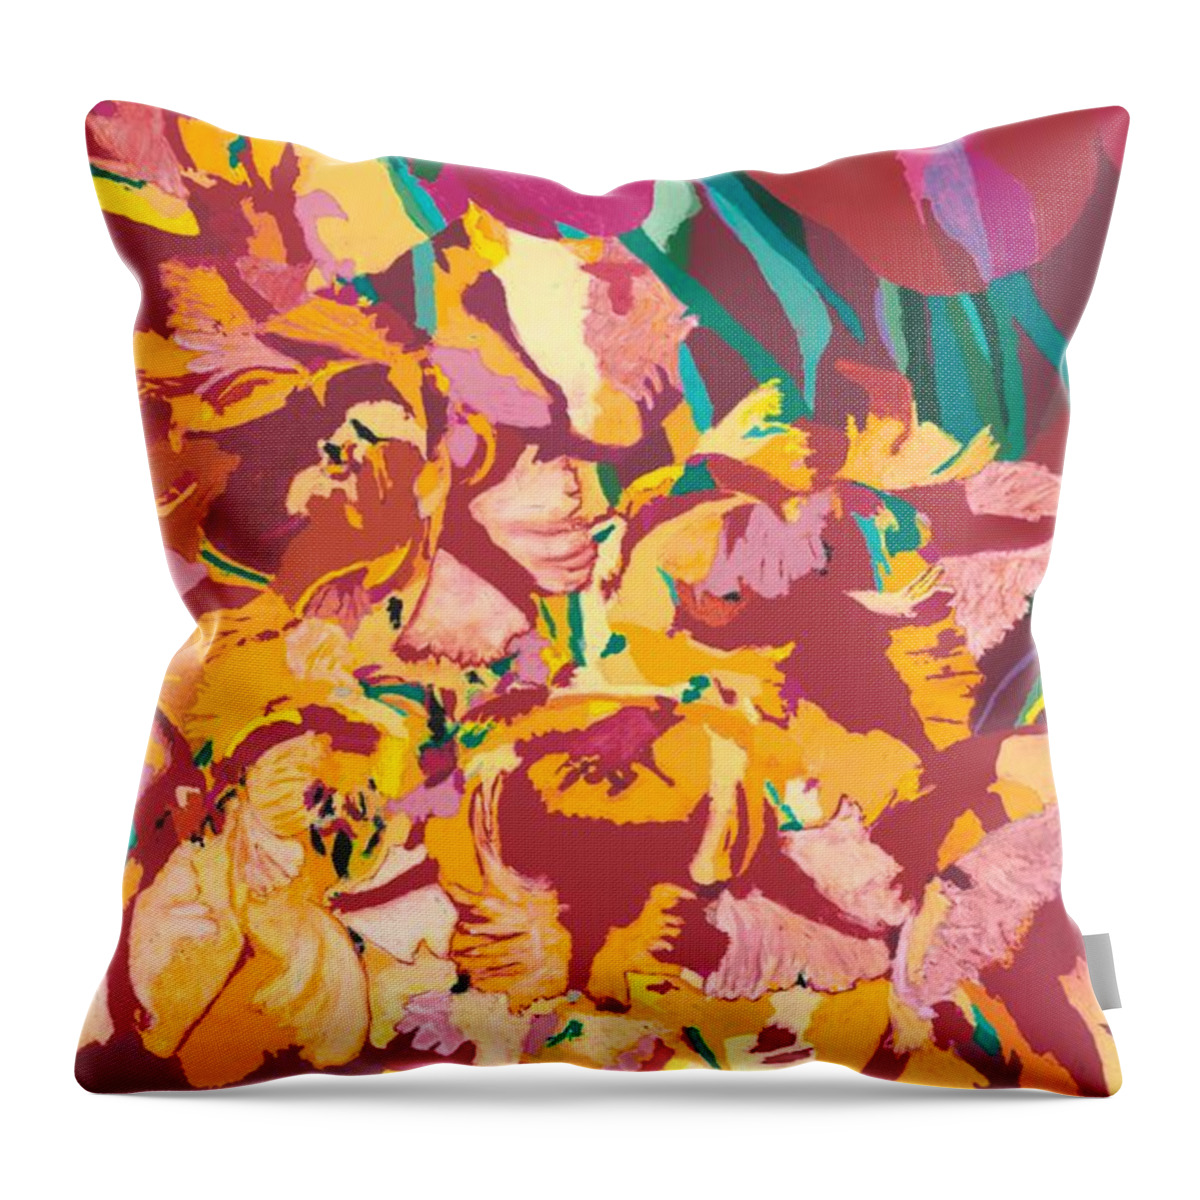 Landscape Throw Pillow featuring the painting Fire Bouquet by Allan P Friedlander